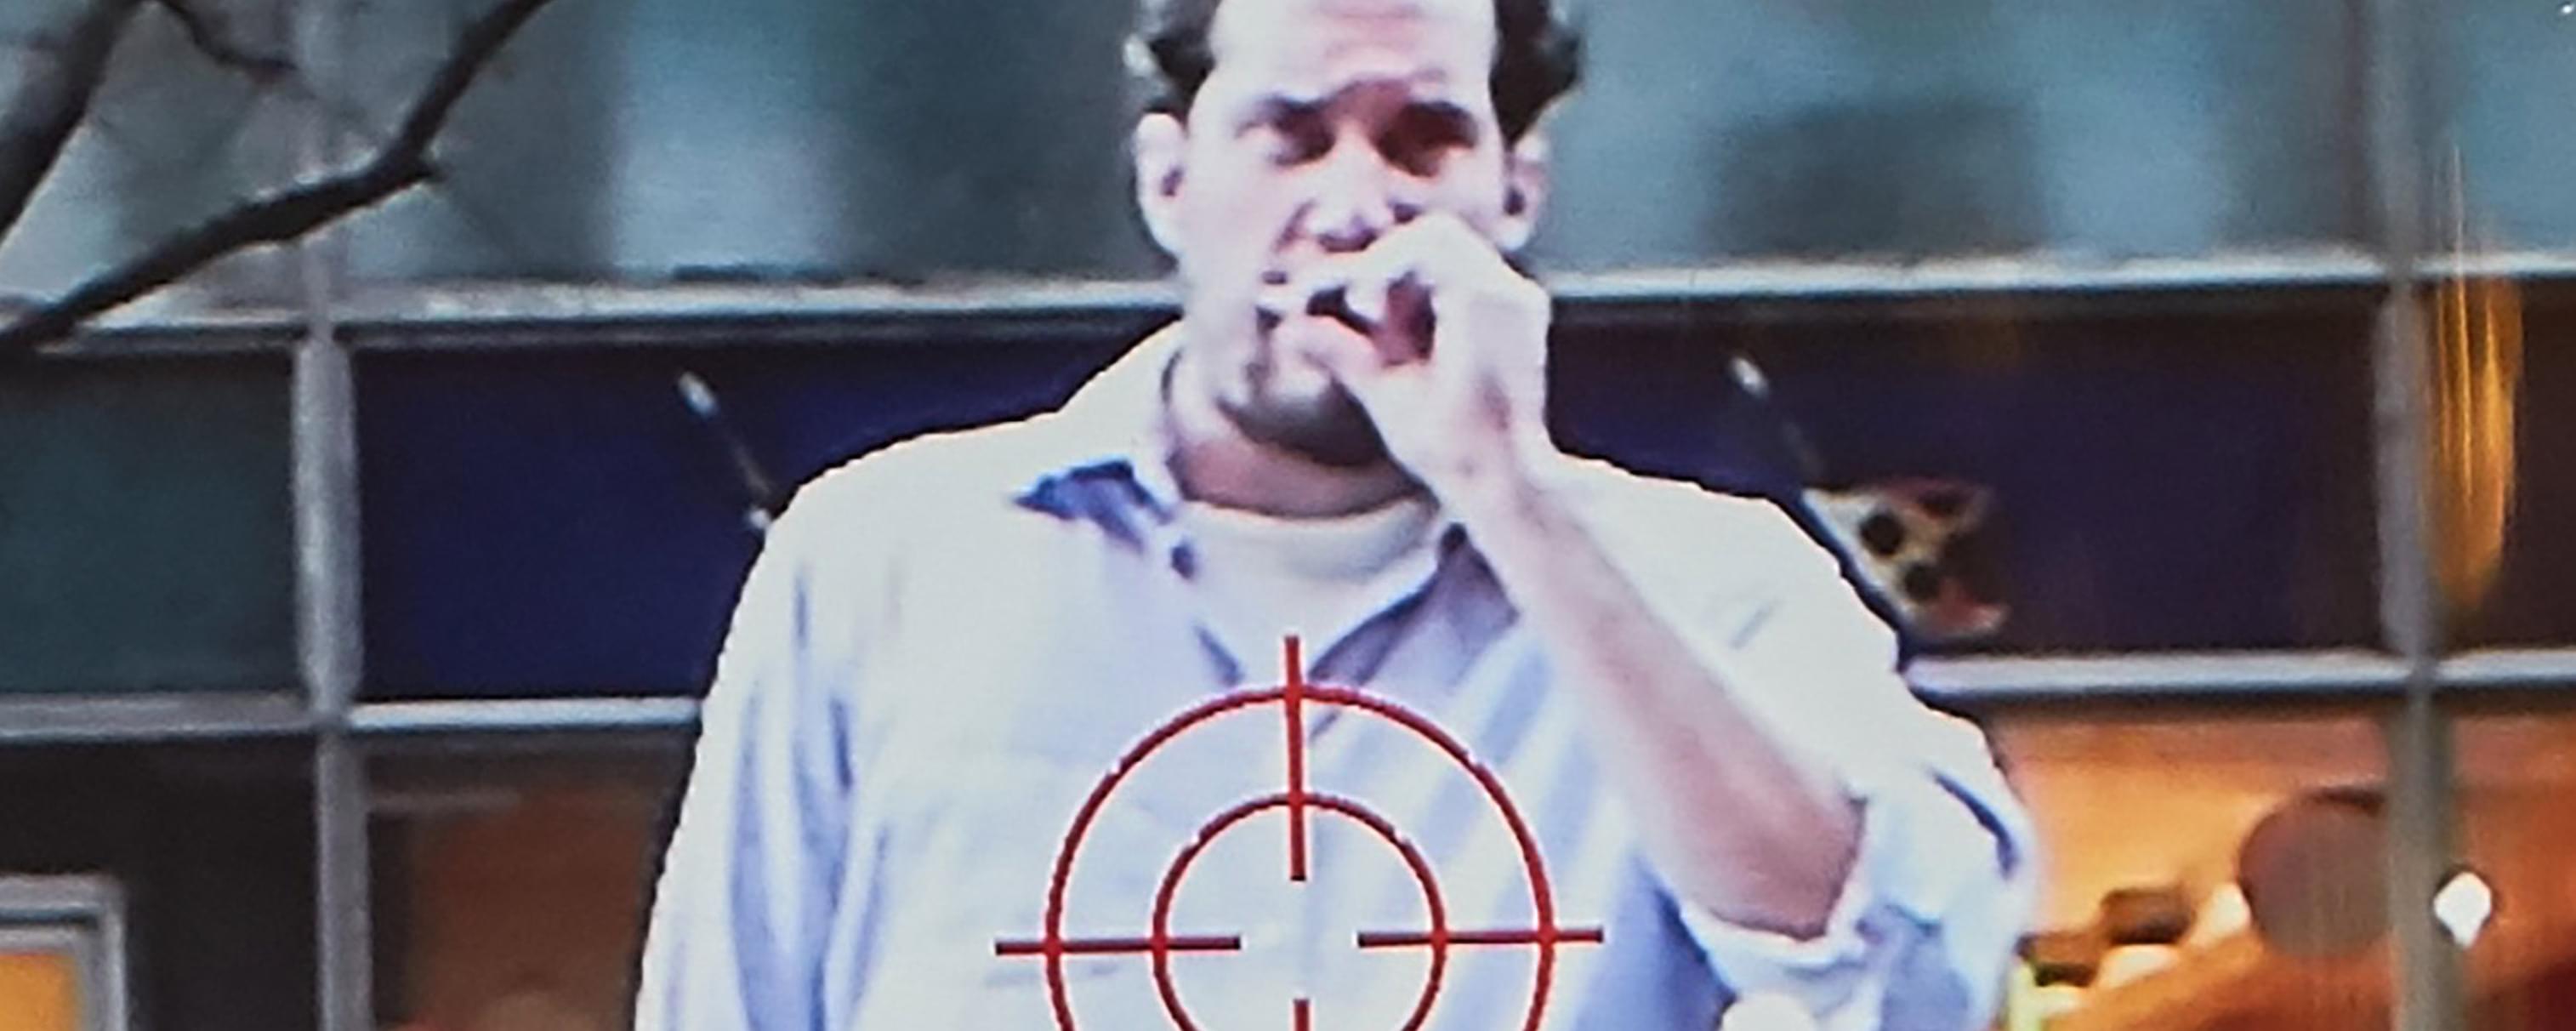 Close up grainy photograph of a man smoking a cigarette in a white button down shirt, with a cross-hairs target symbol shown on top his shirt